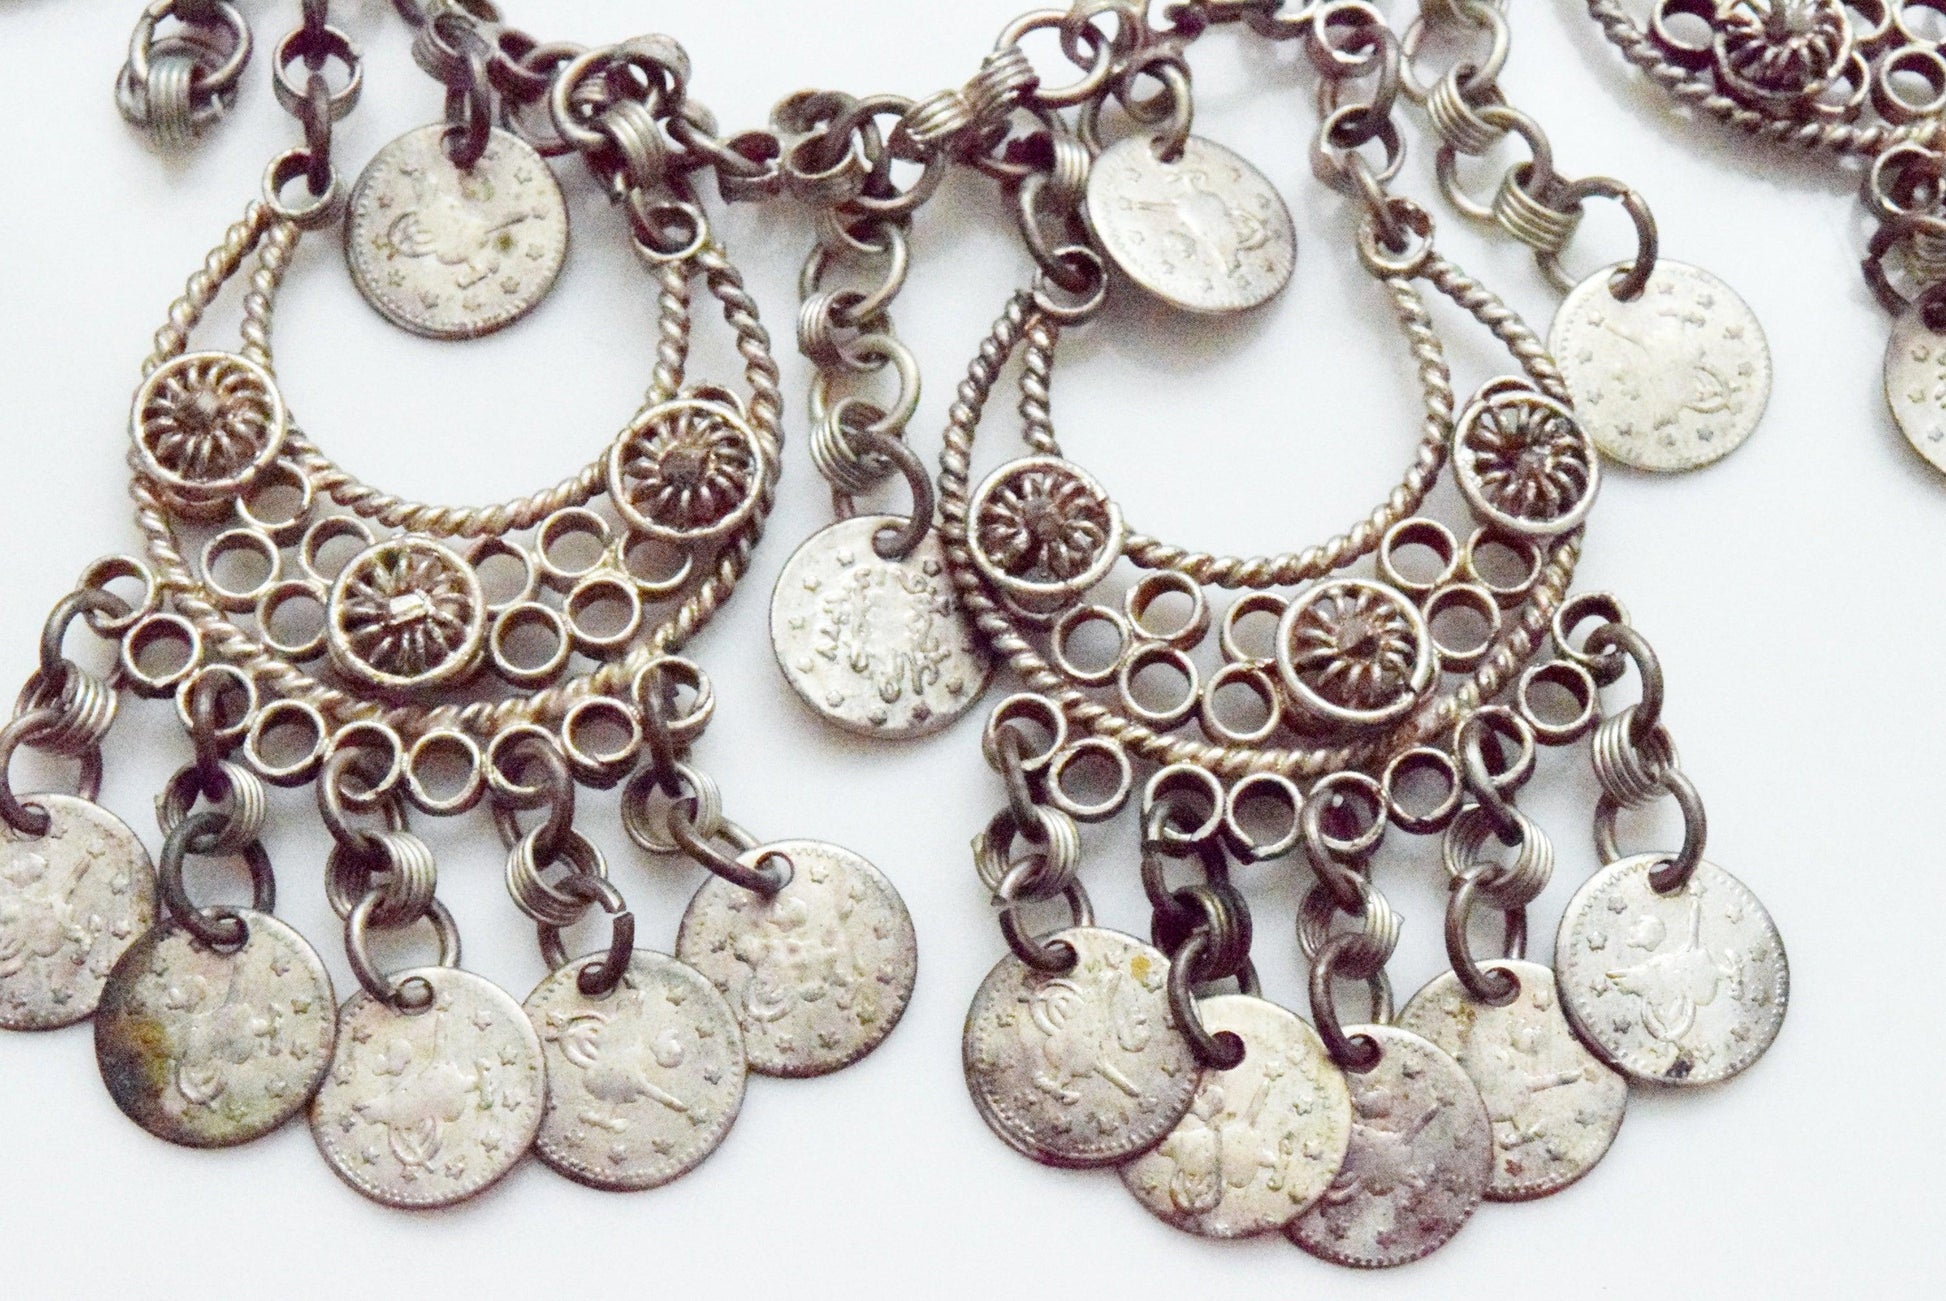 Vintage Turkish Folk Necklace with Faux Coins - Anteeka